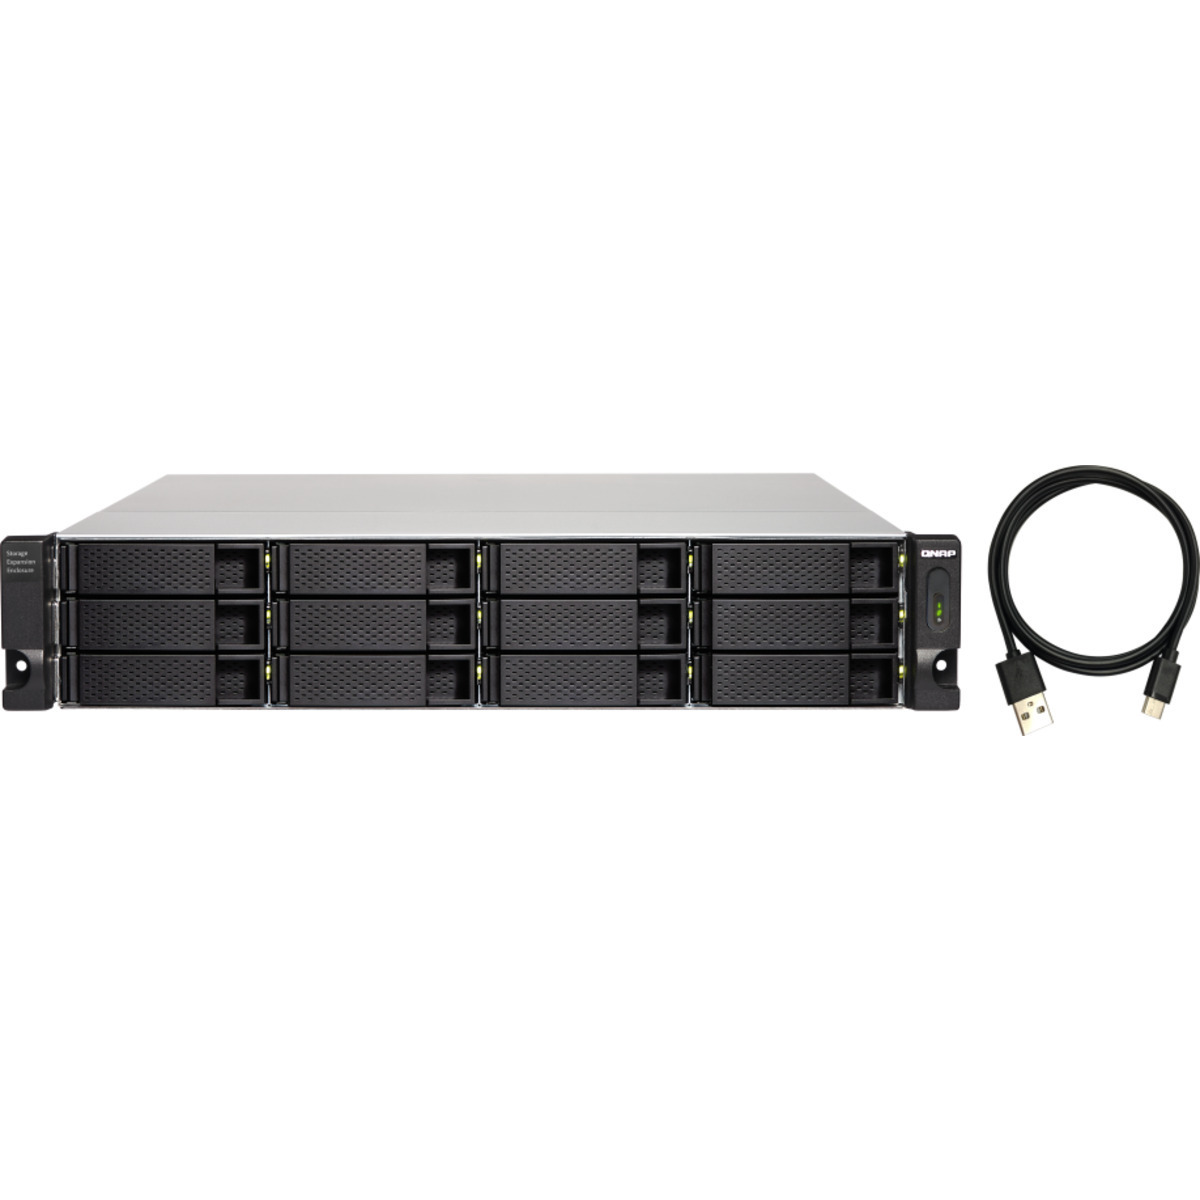 QNAP TL-R1200C-RP External Expansion Drive 22tb 12-Bay RackMount Multimedia / Power User / Business Expansion Enclosure 11x2tb Western Digital Red Pro WD2002FFSX 3.5 7200rpm SATA 6Gb/s HDD NAS Class Drives Installed - Burn-In Tested TL-R1200C-RP External Expansion Drive